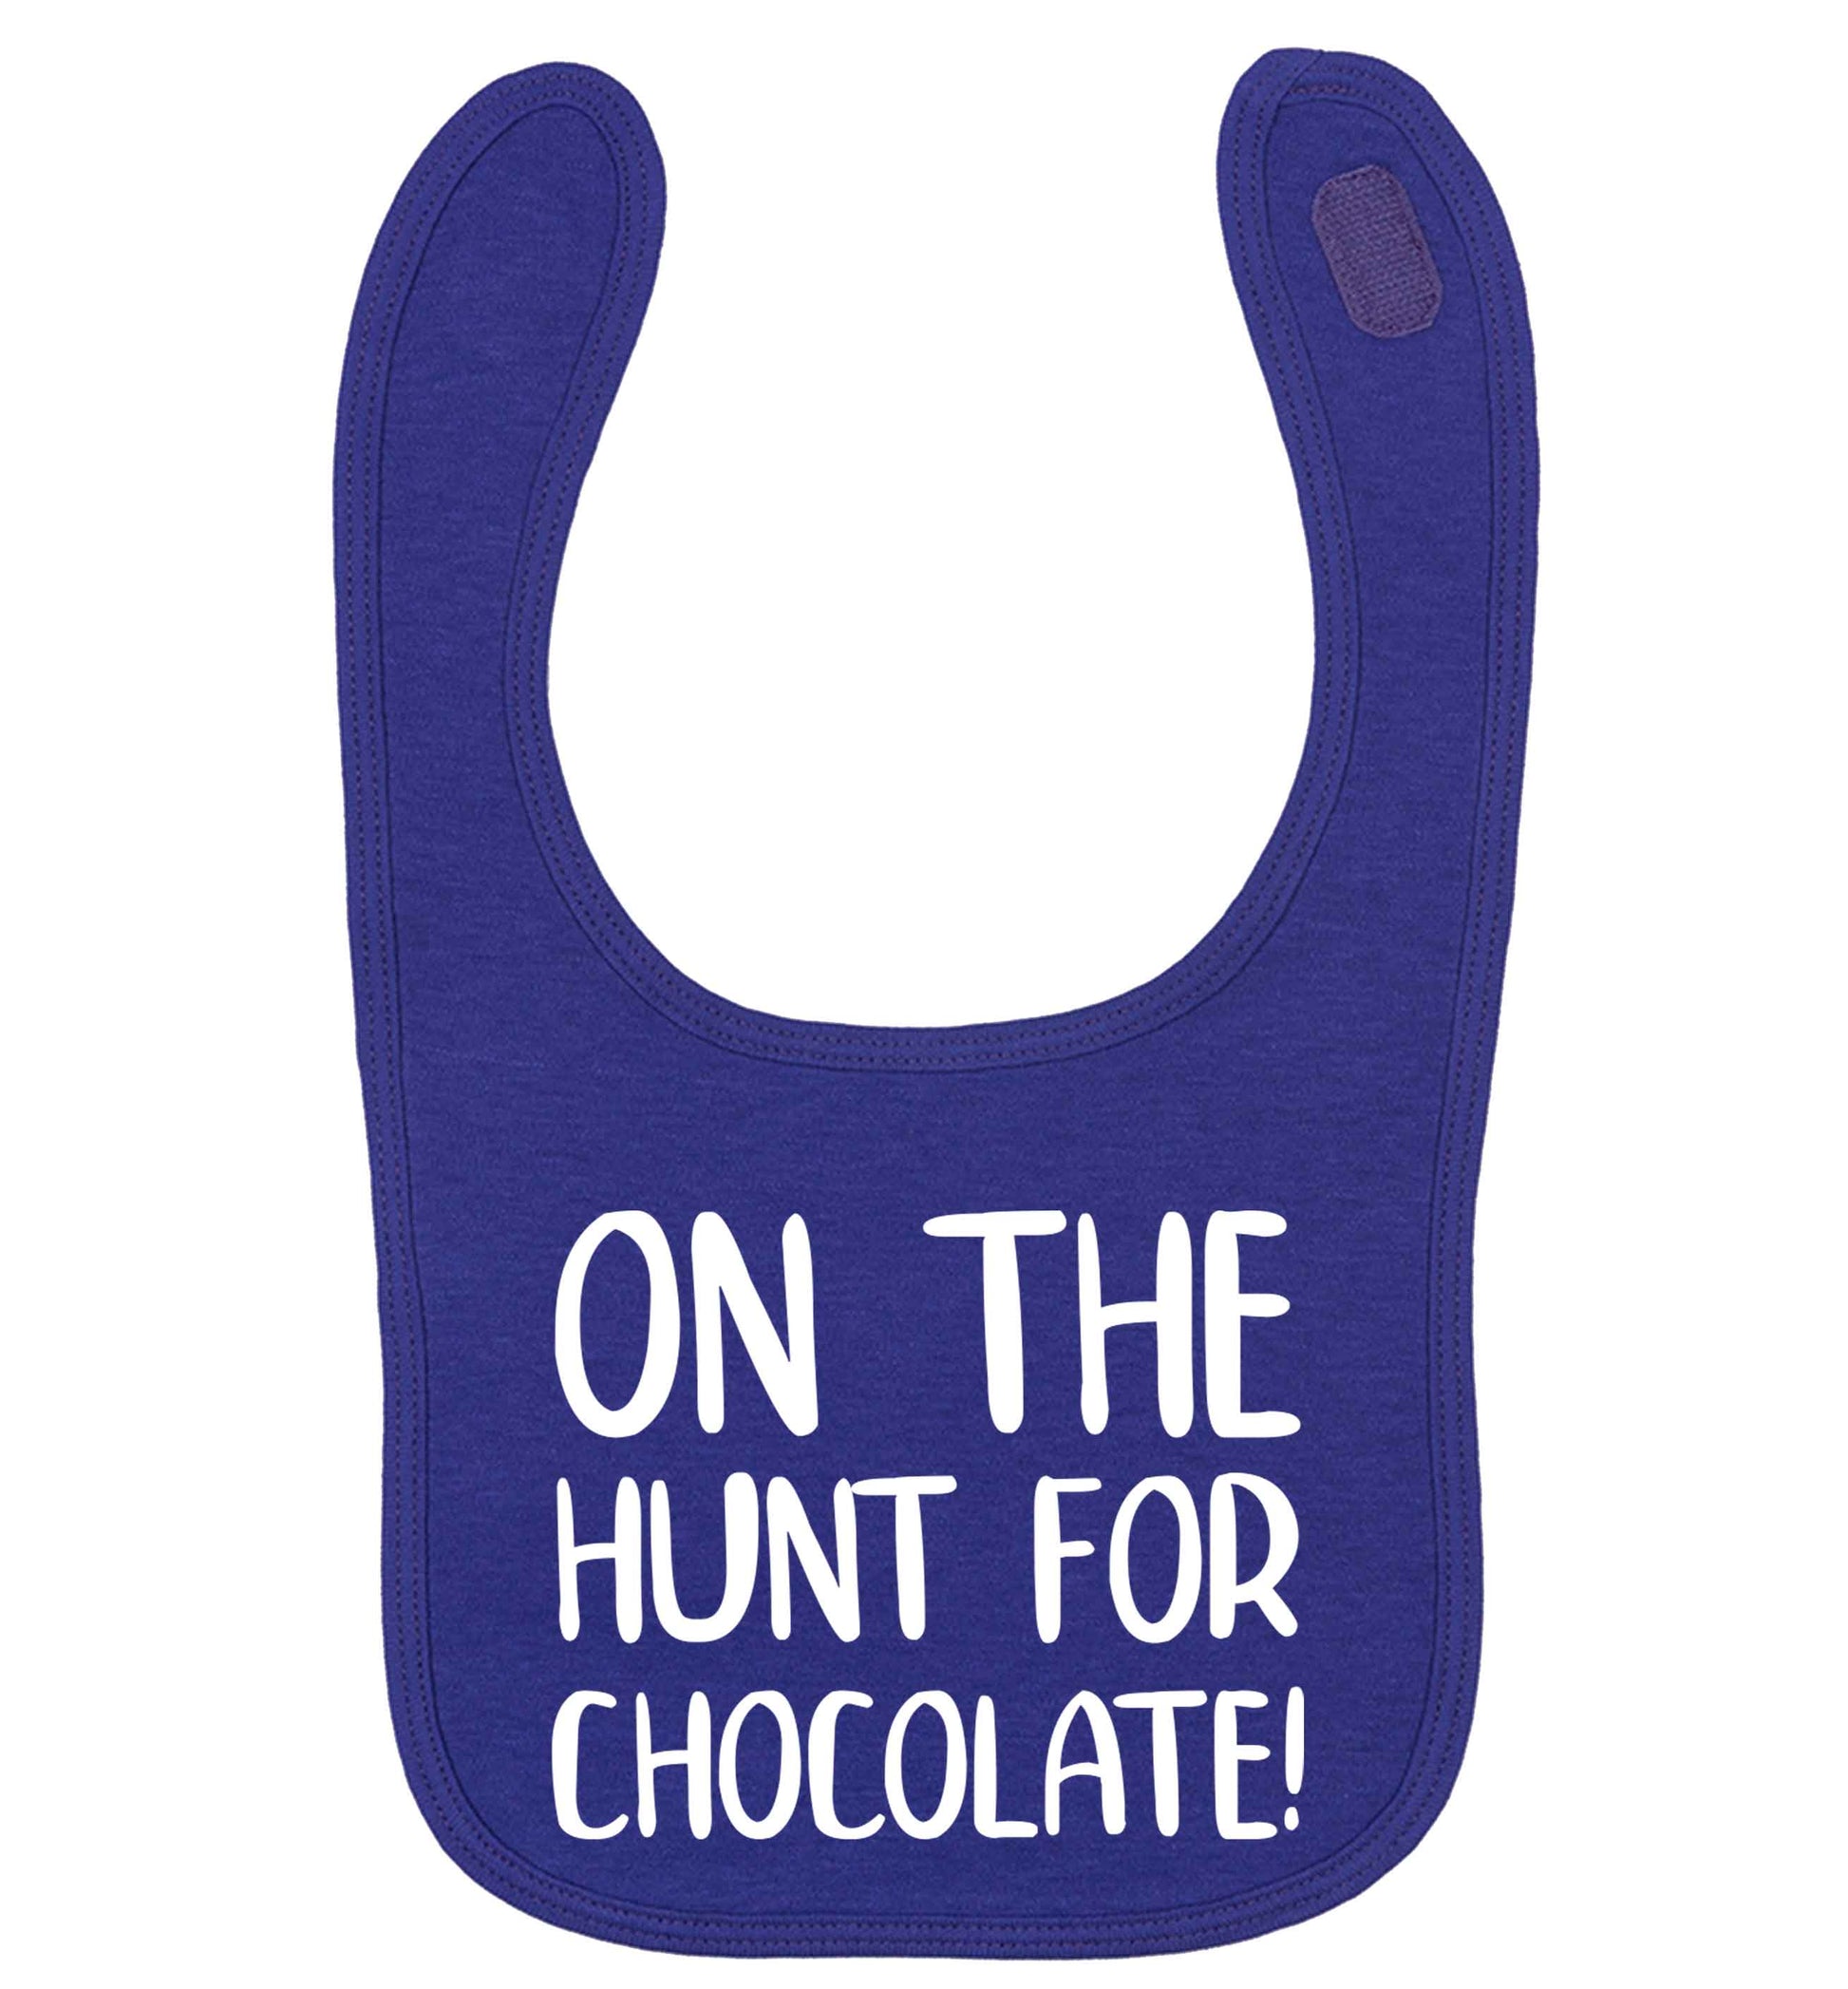 On the hunt for chocolate! | baby bib